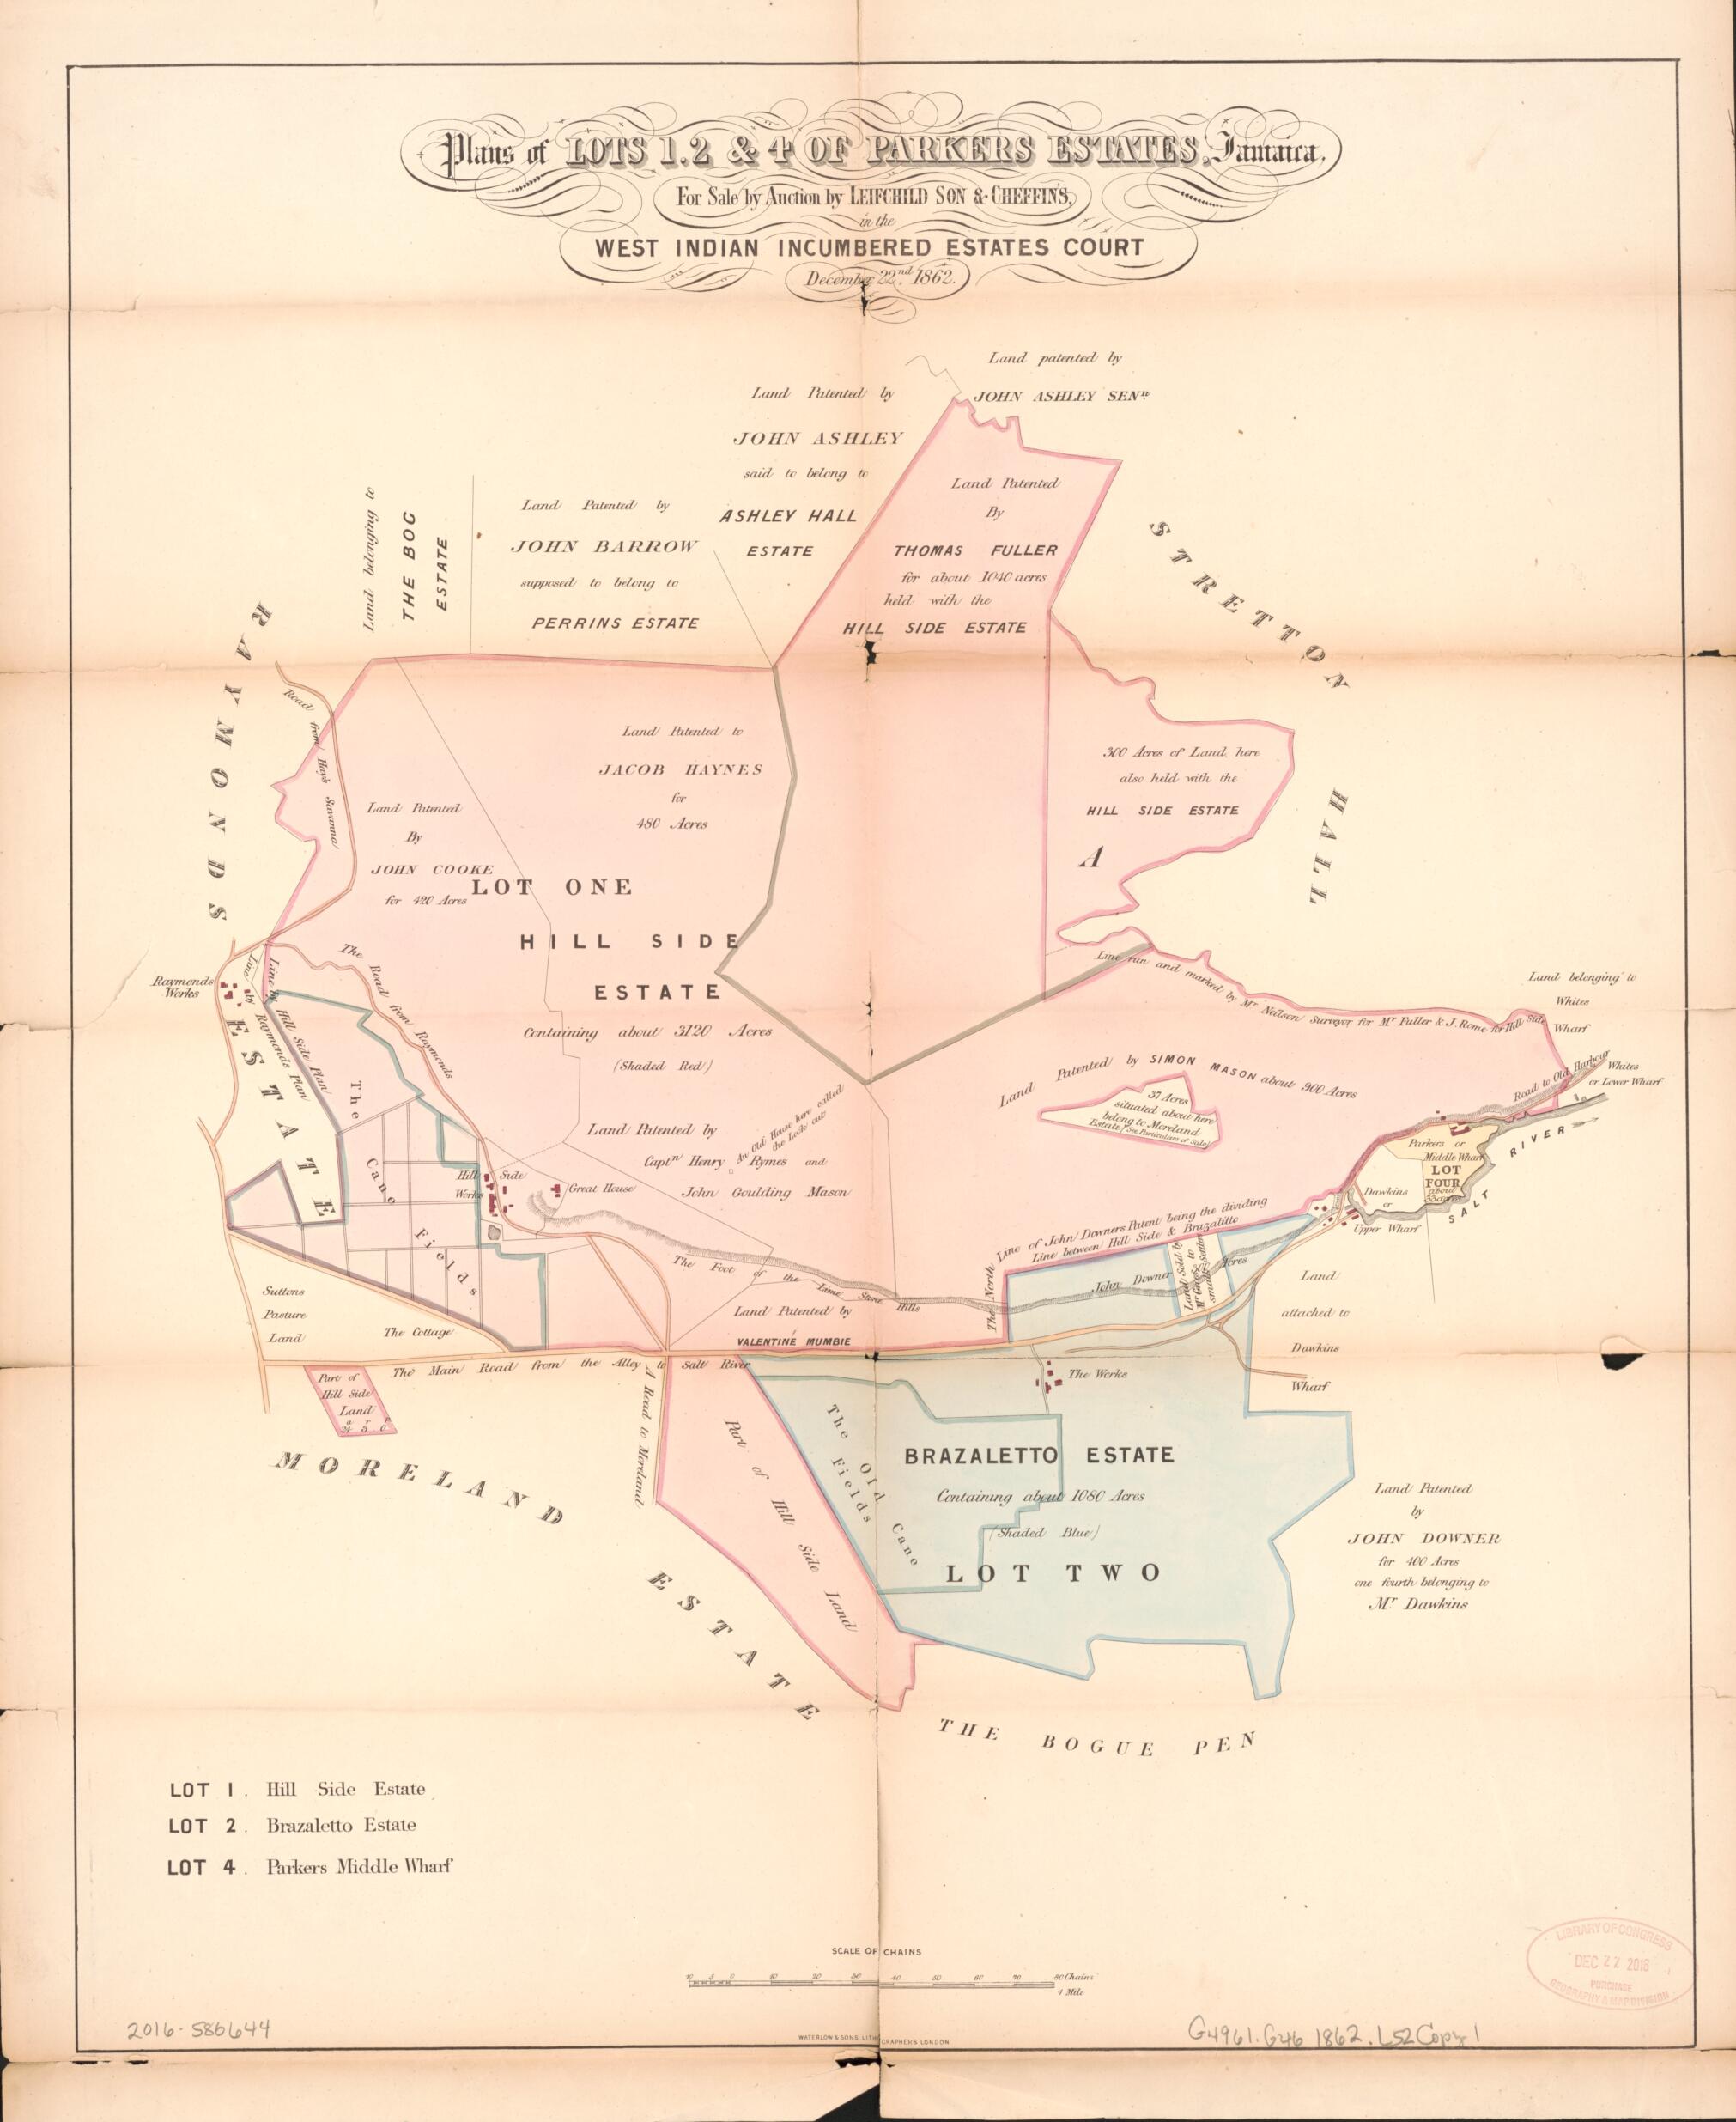 This old map of Plan of Lots 1, 2 &amp; 4 of Parkers Estate, Jamaica from Encumbered Estates In the West Indies (Jamaica) from 1862 was created by Henry James Stonor in 1862